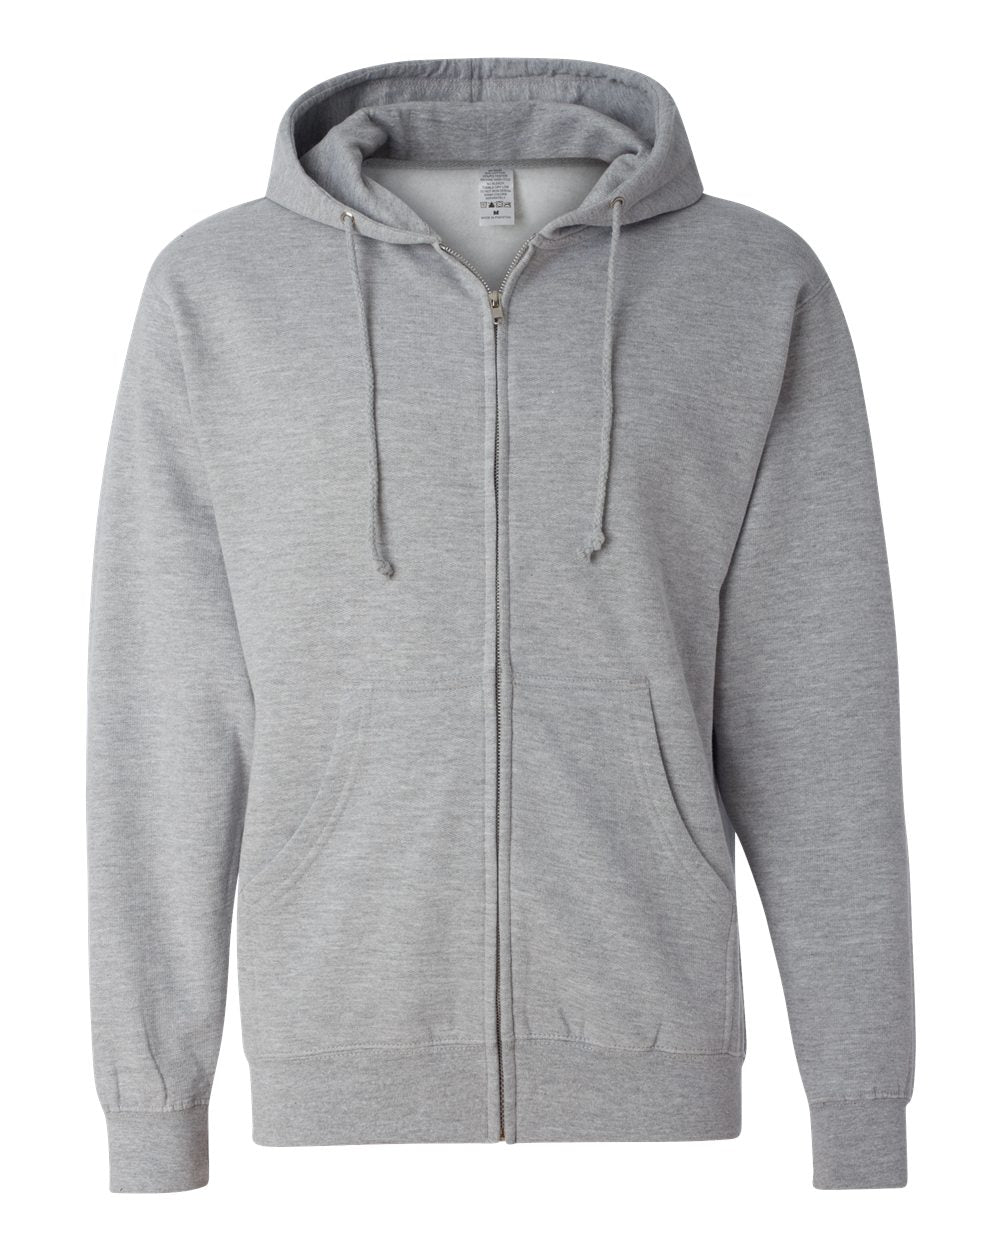 Independent Trading Co. - Midweight Full-Zip Hooded Sweatshirt - SS4500Z- XS - 3XL